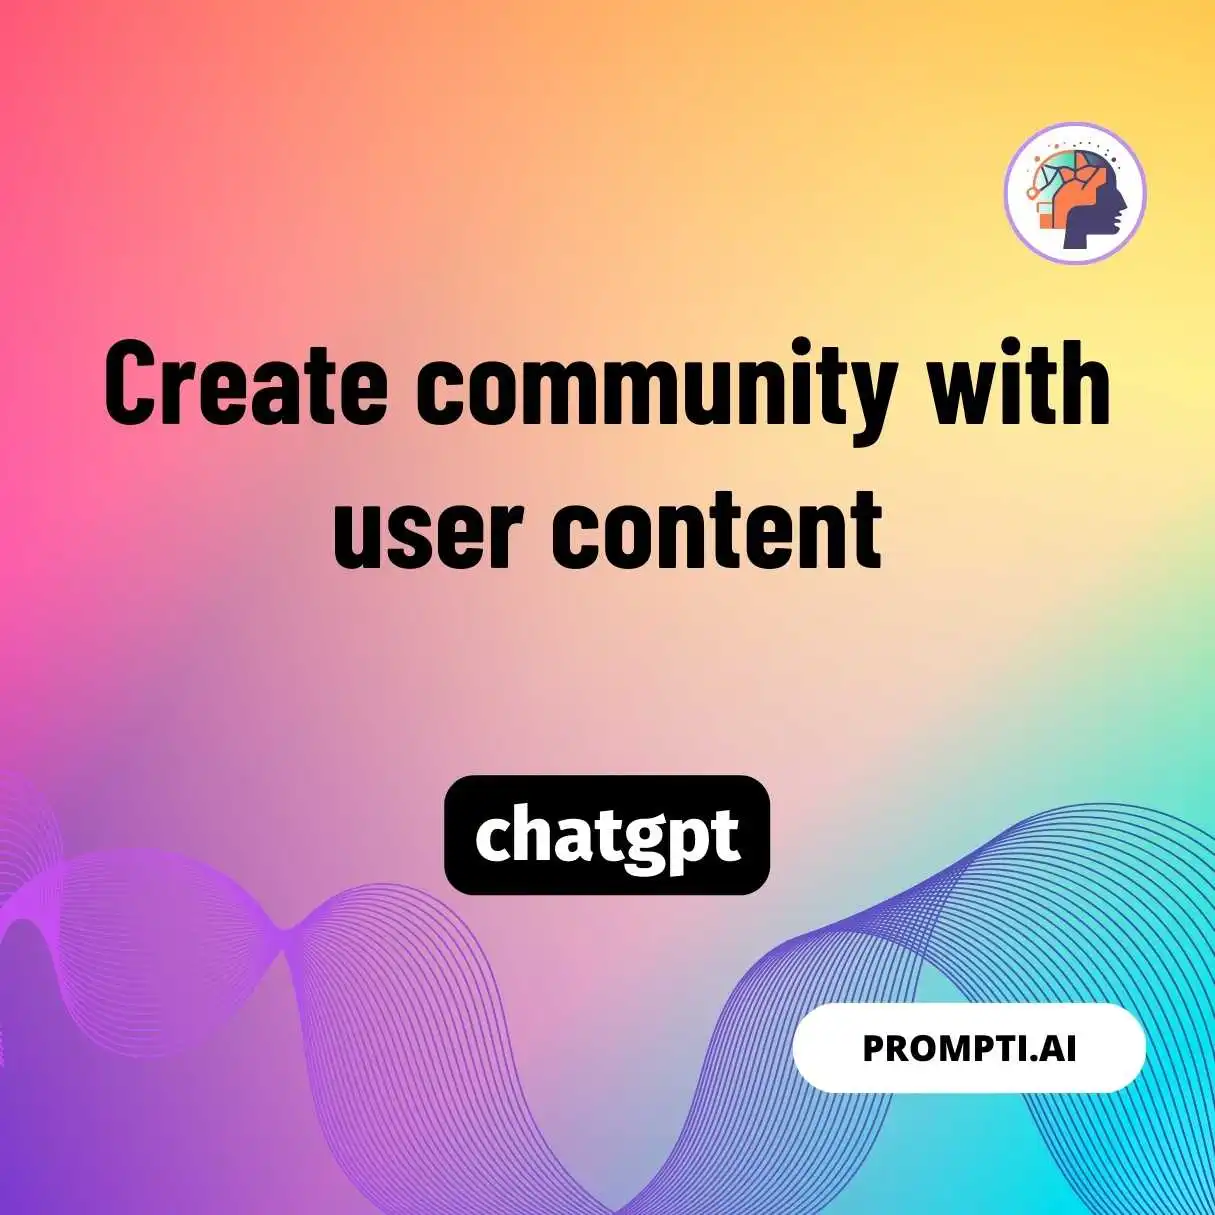 Create community with user content